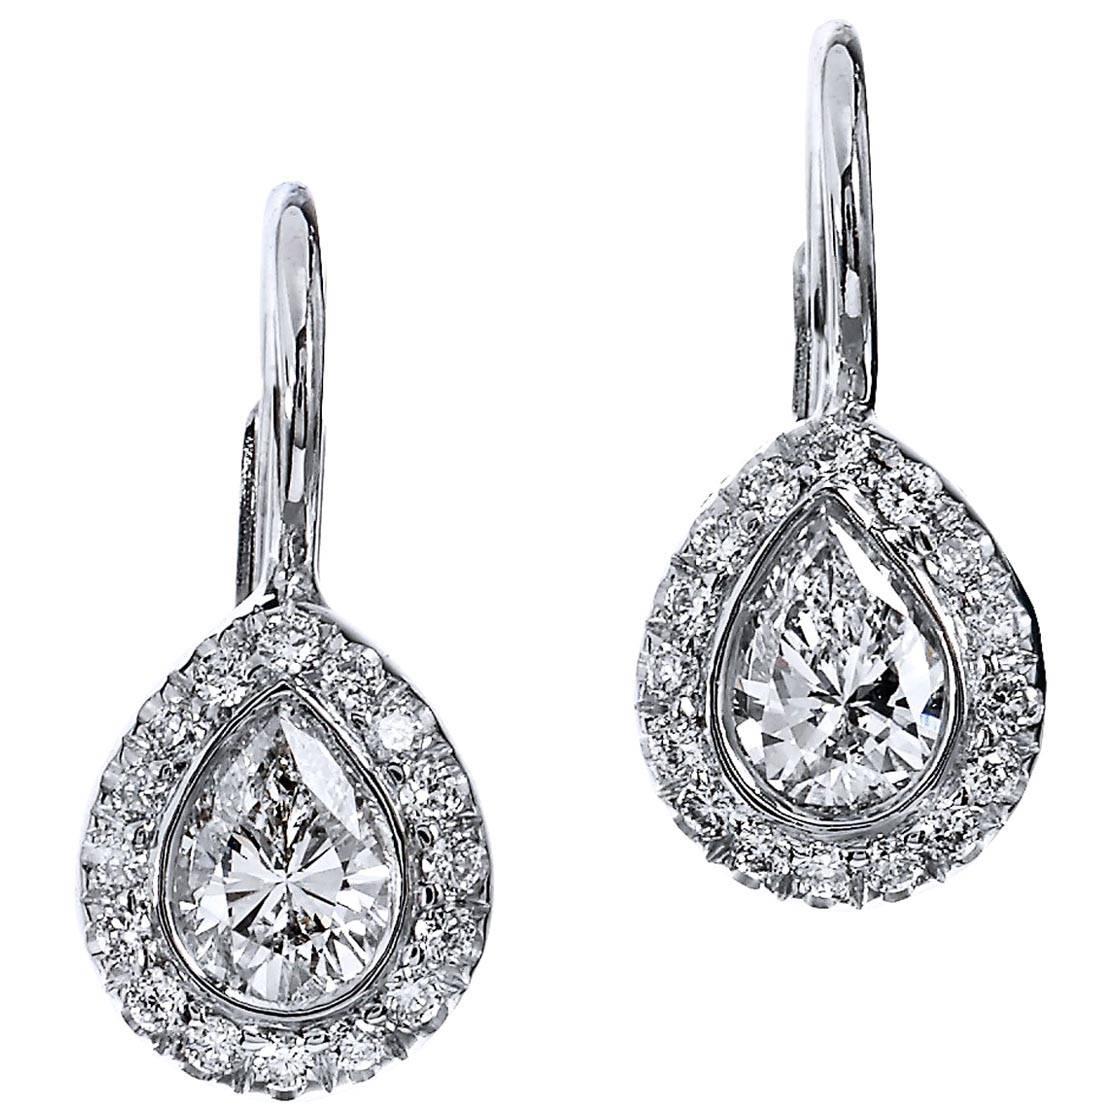 0.41 Carat Pear Shaped Diamonds in 18 karat White Gold with Lever-Back Earrings